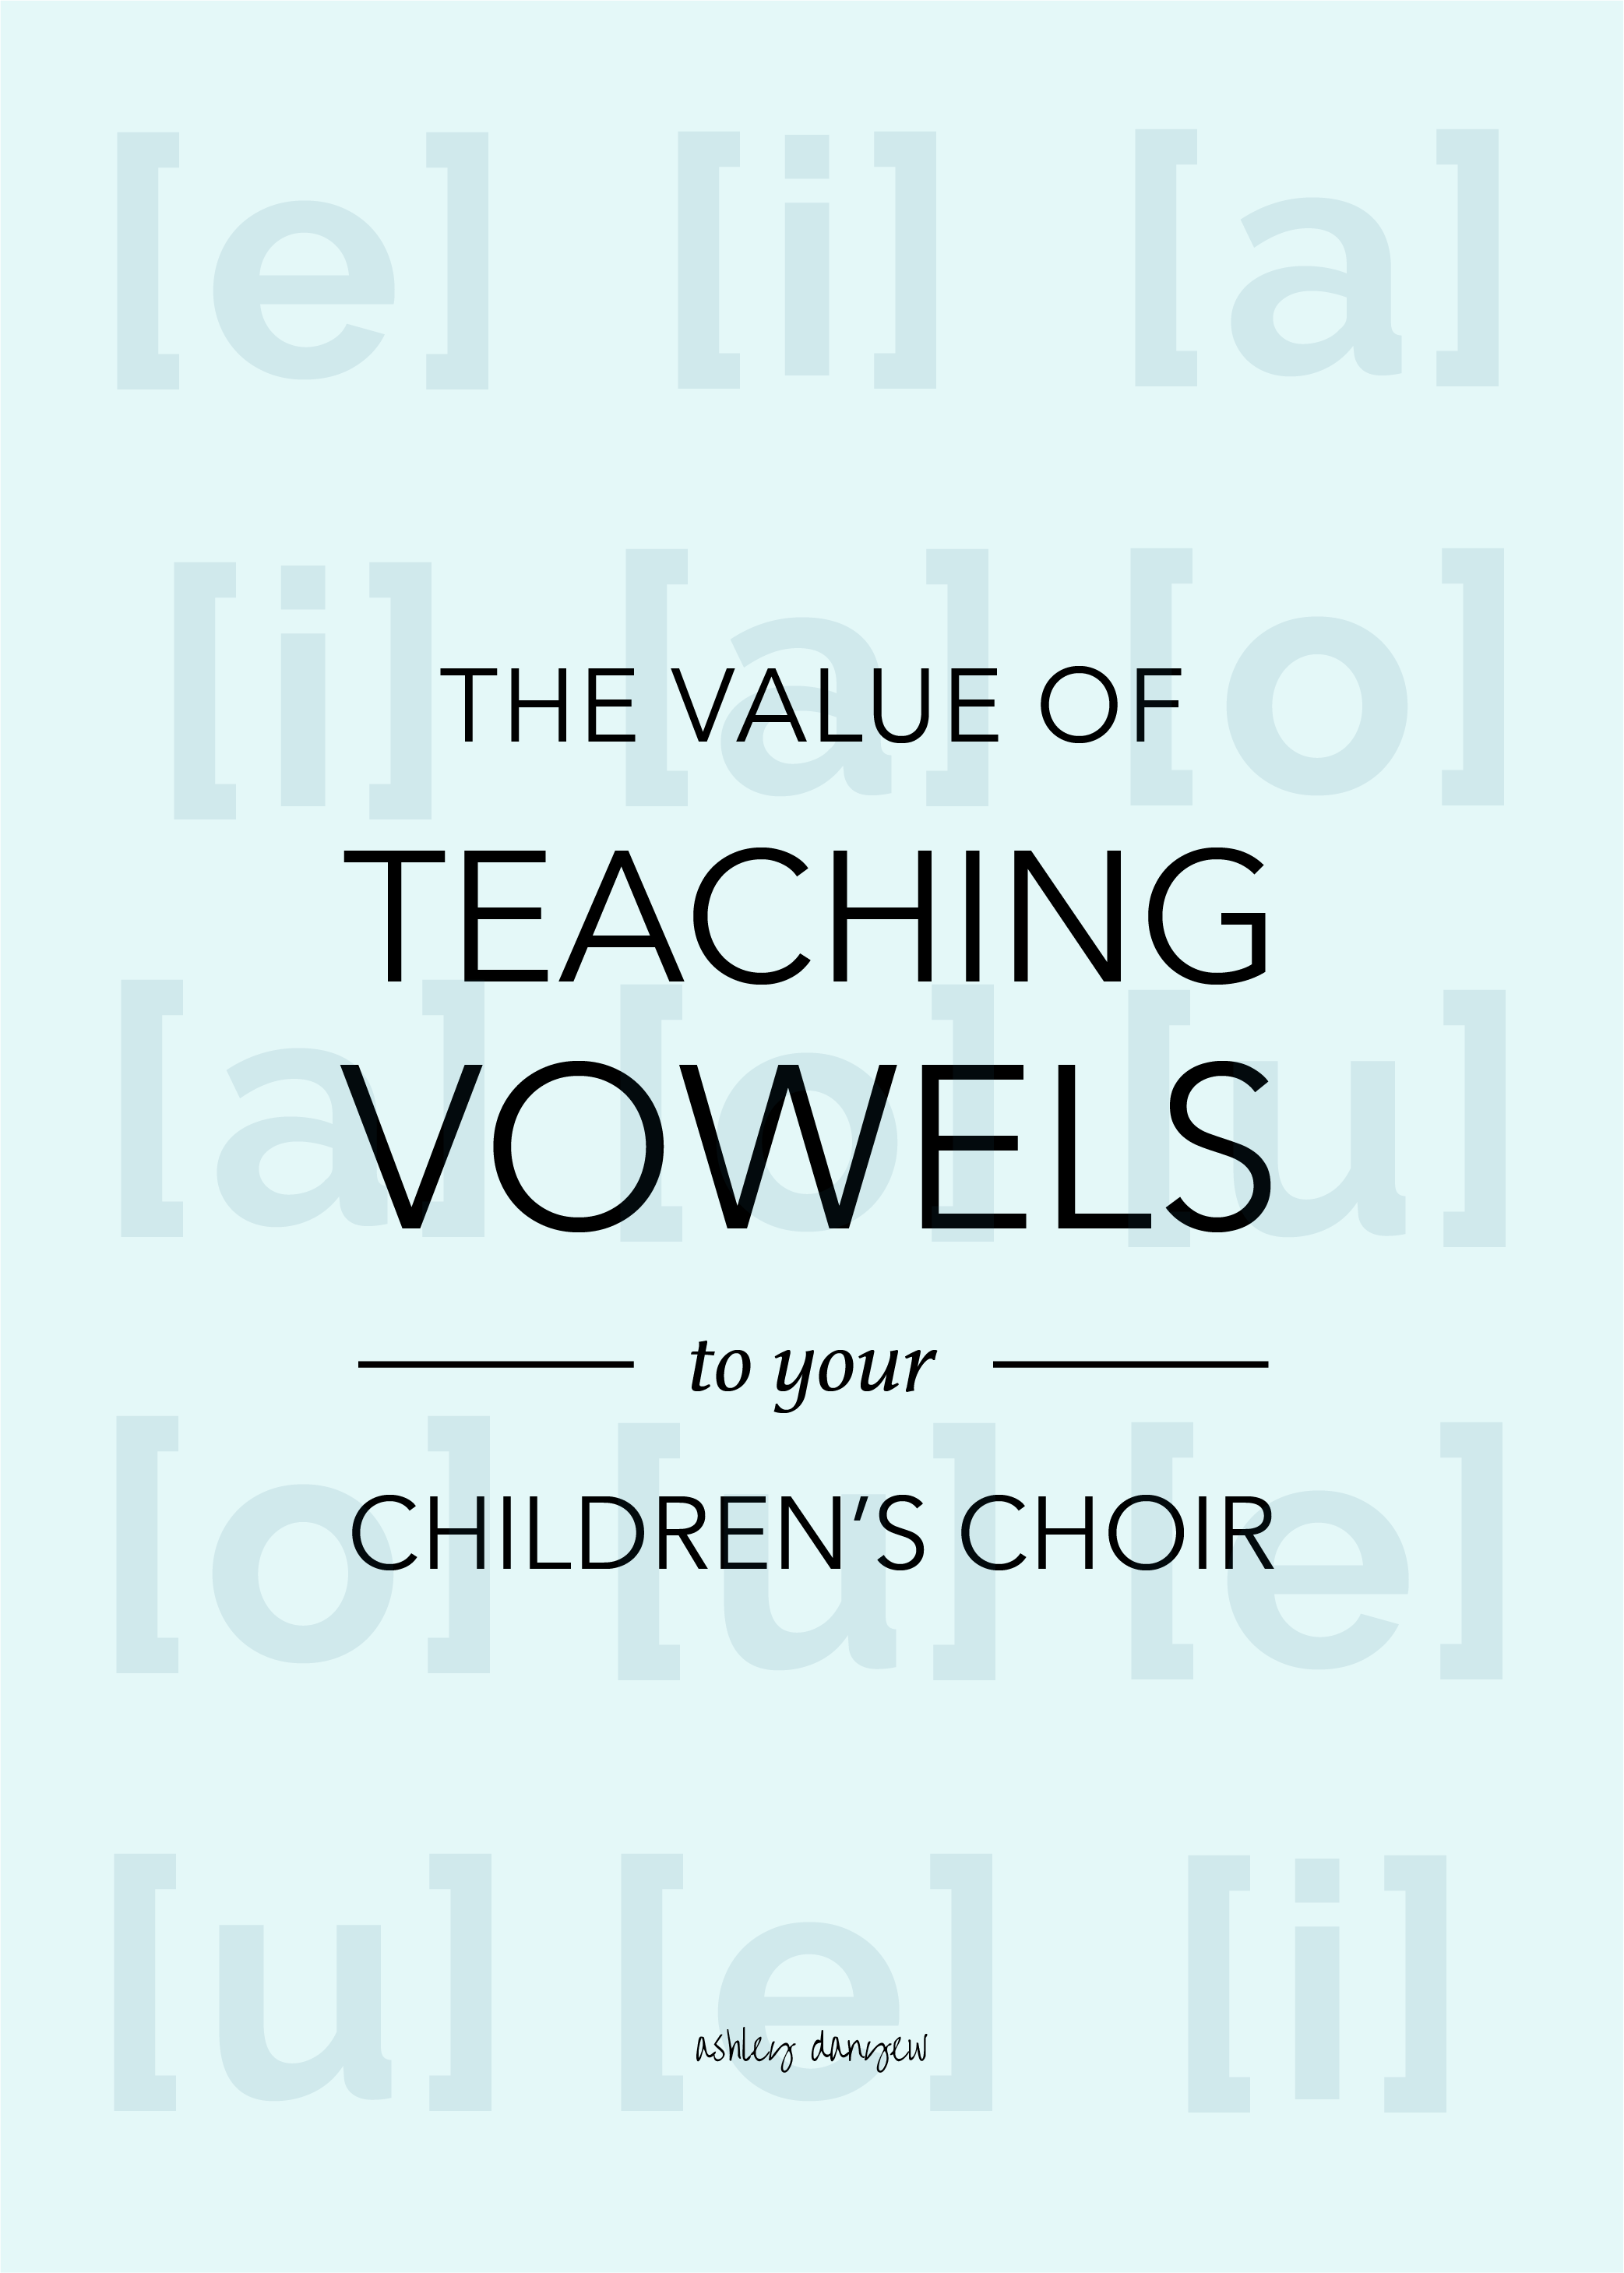 Copy of The Value of Teaching Vowels to Your Children's Choir